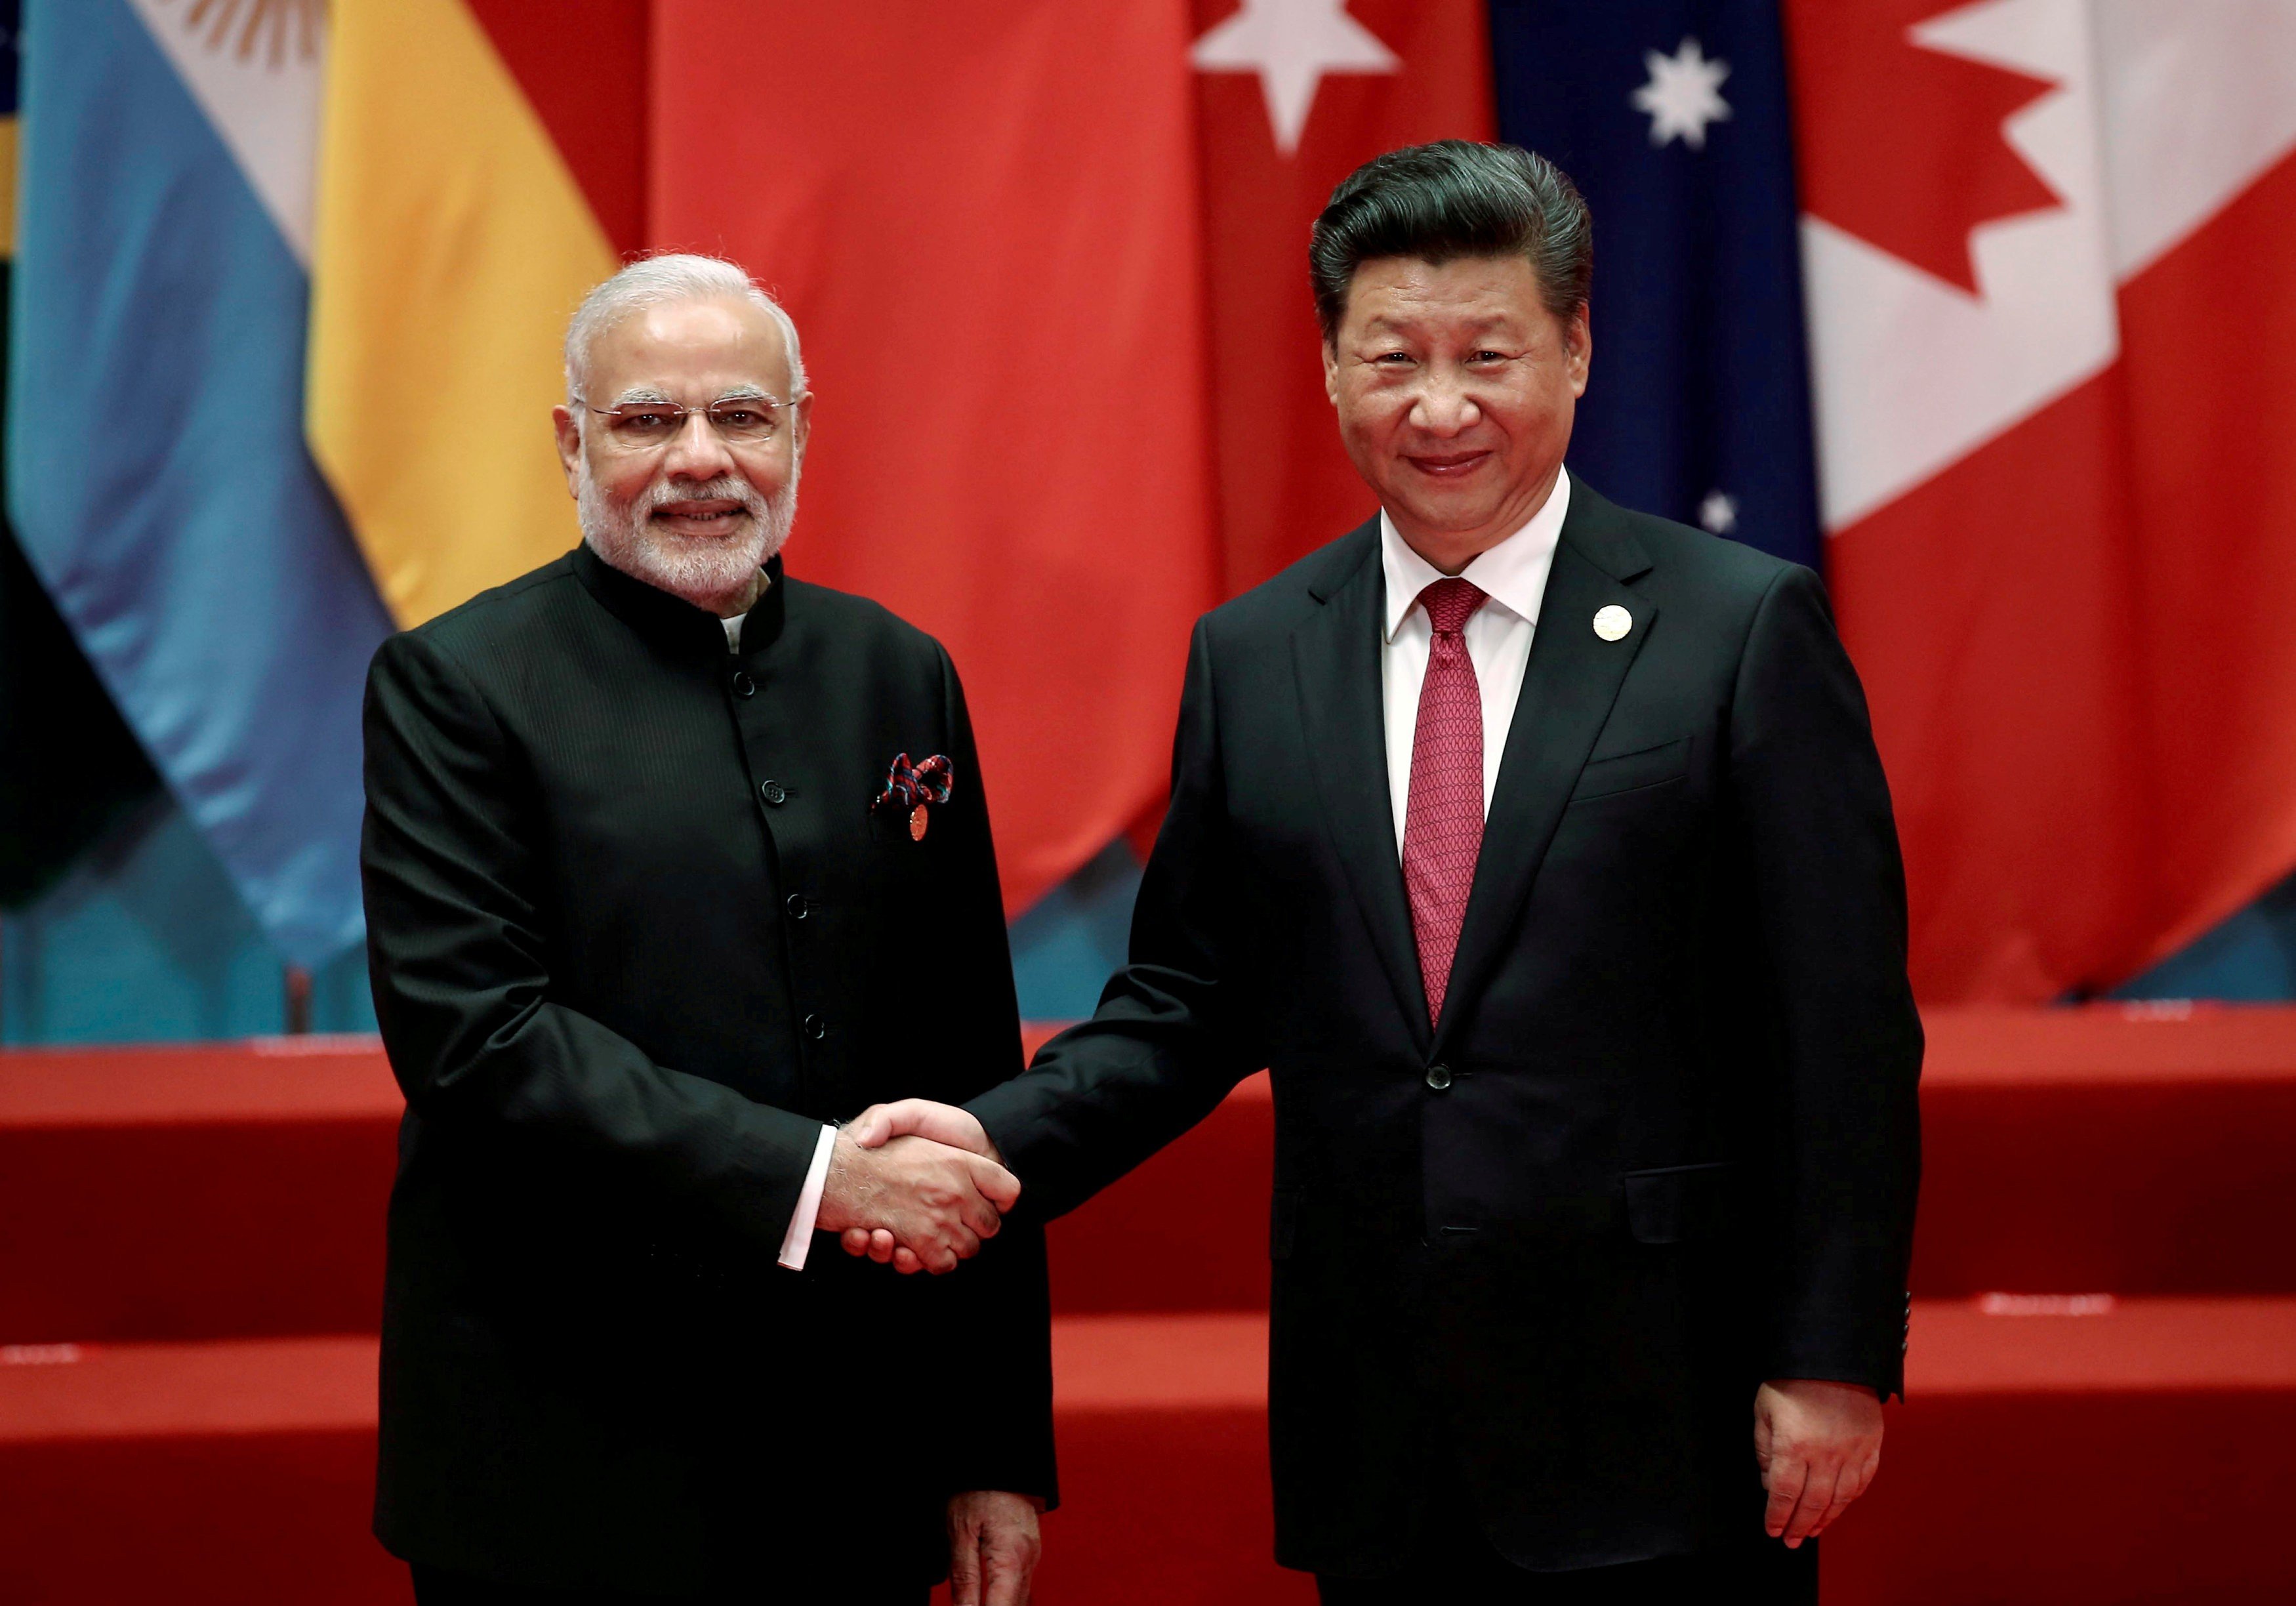 Indian Prime Minister Narendra Modi and Chinese President Xi Jinping in 2015. Photo: Reuters